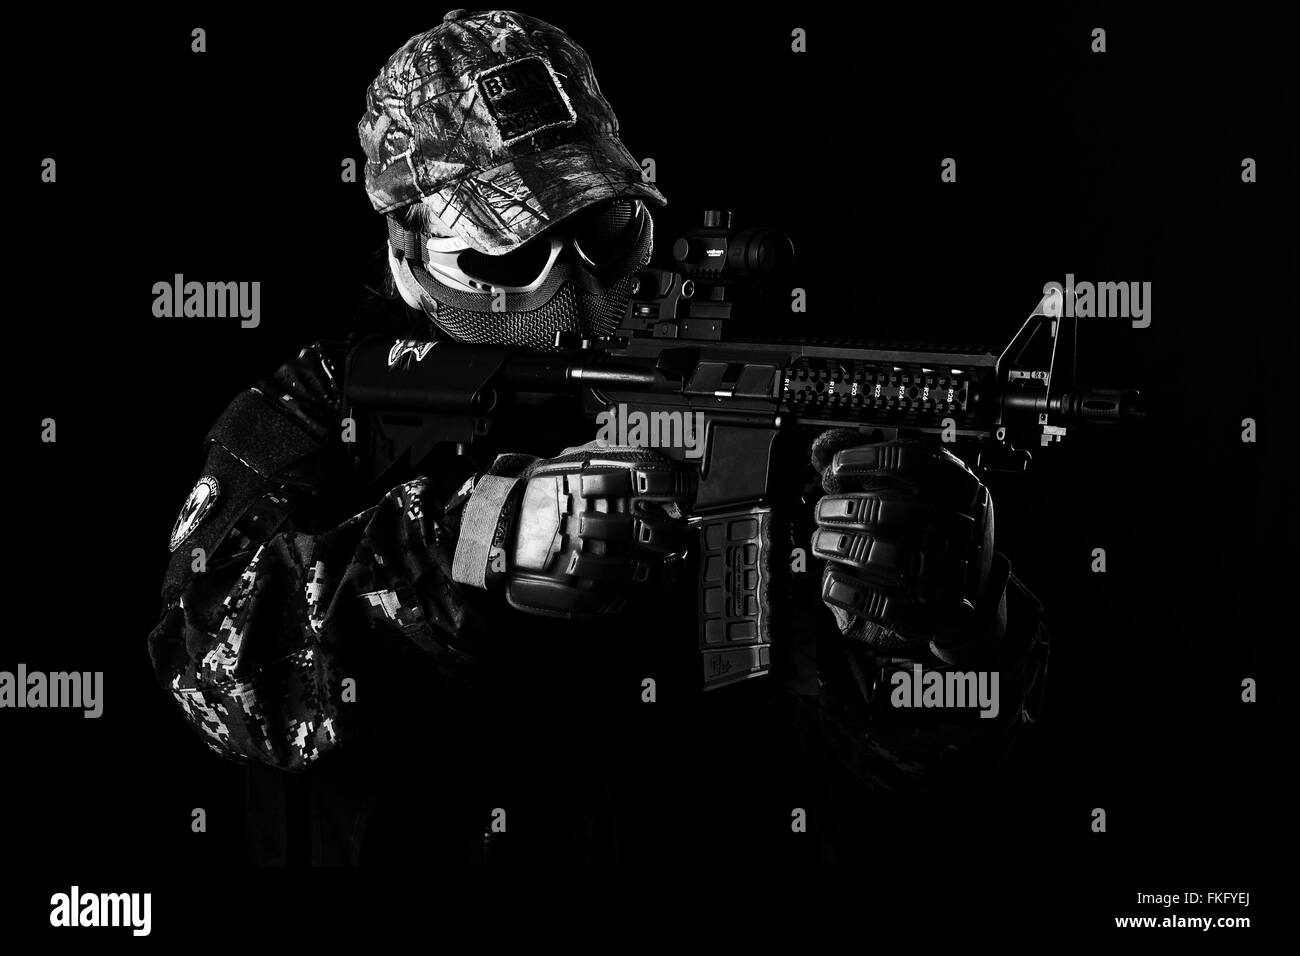 Airsoft game Black and White Stock Photos & Images - Alamy